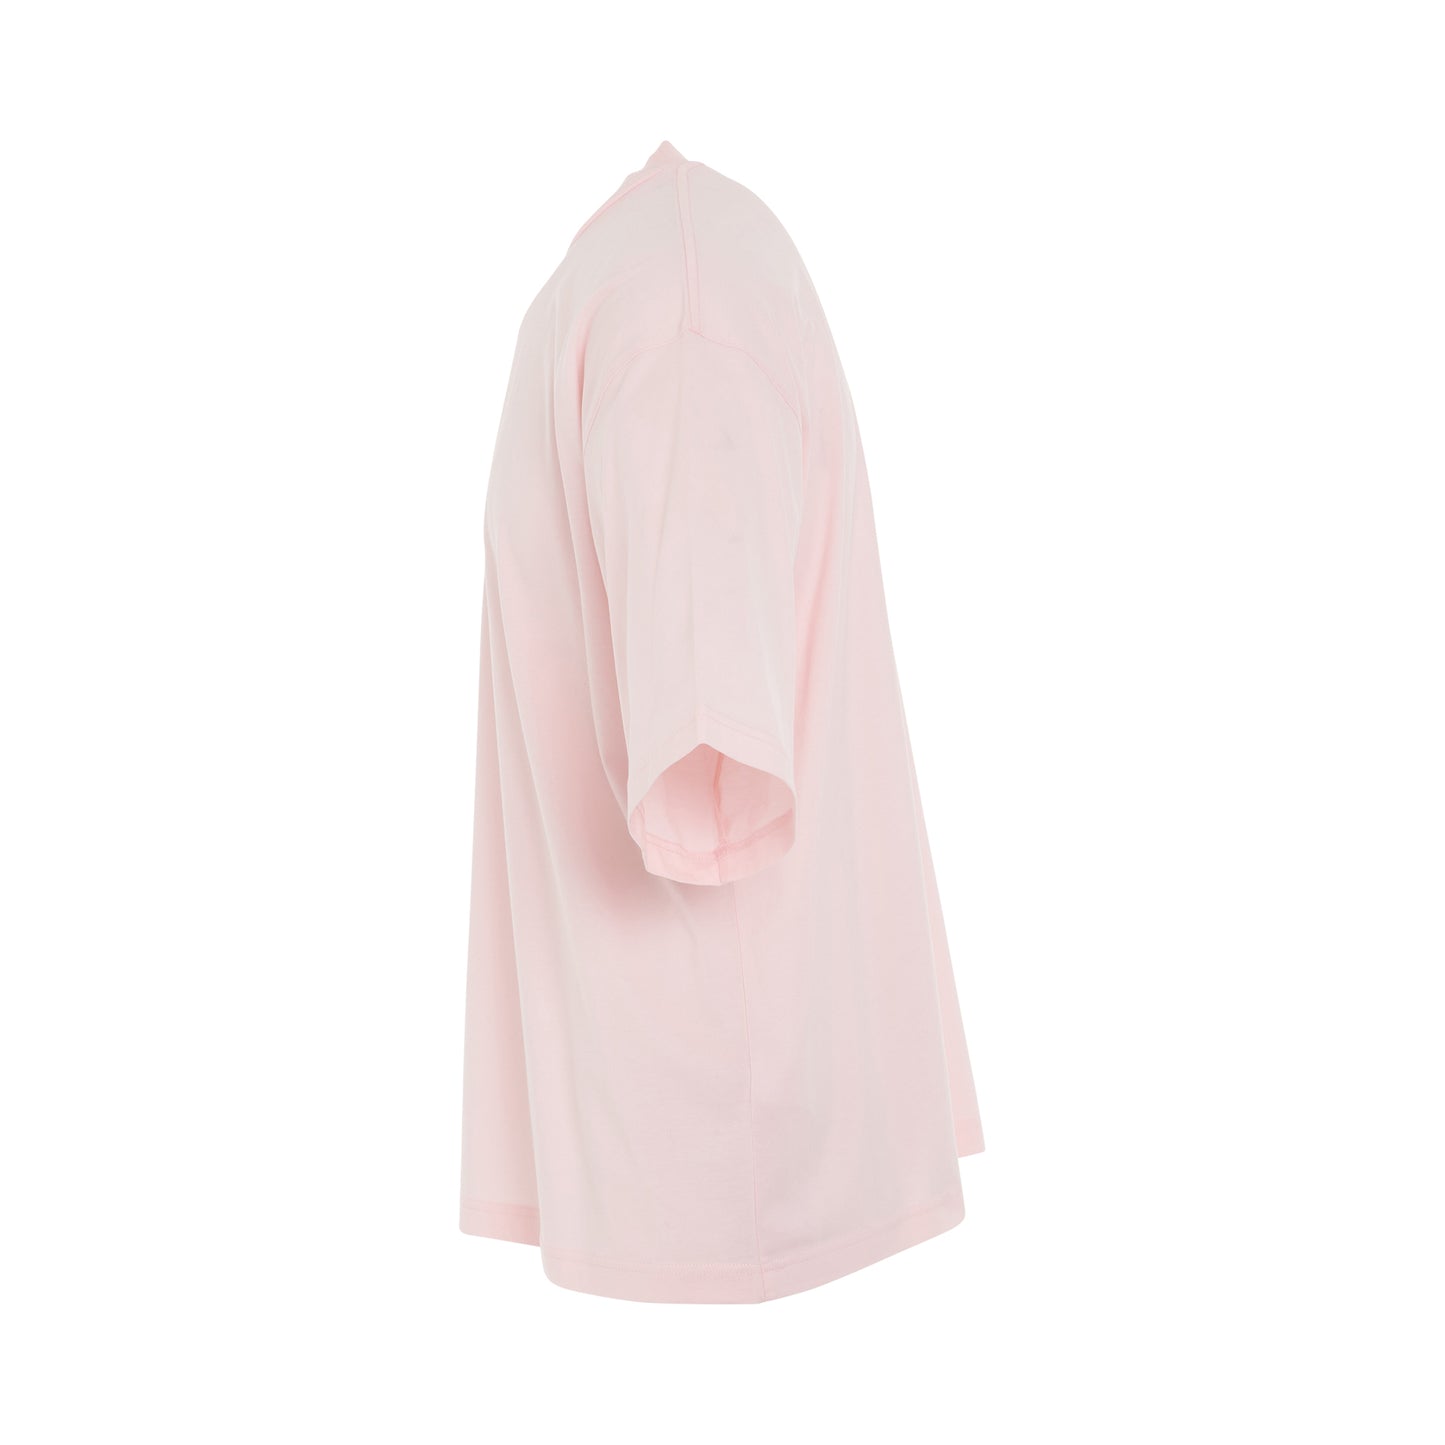 Logo Oversized T-Shirt in Pink Candy